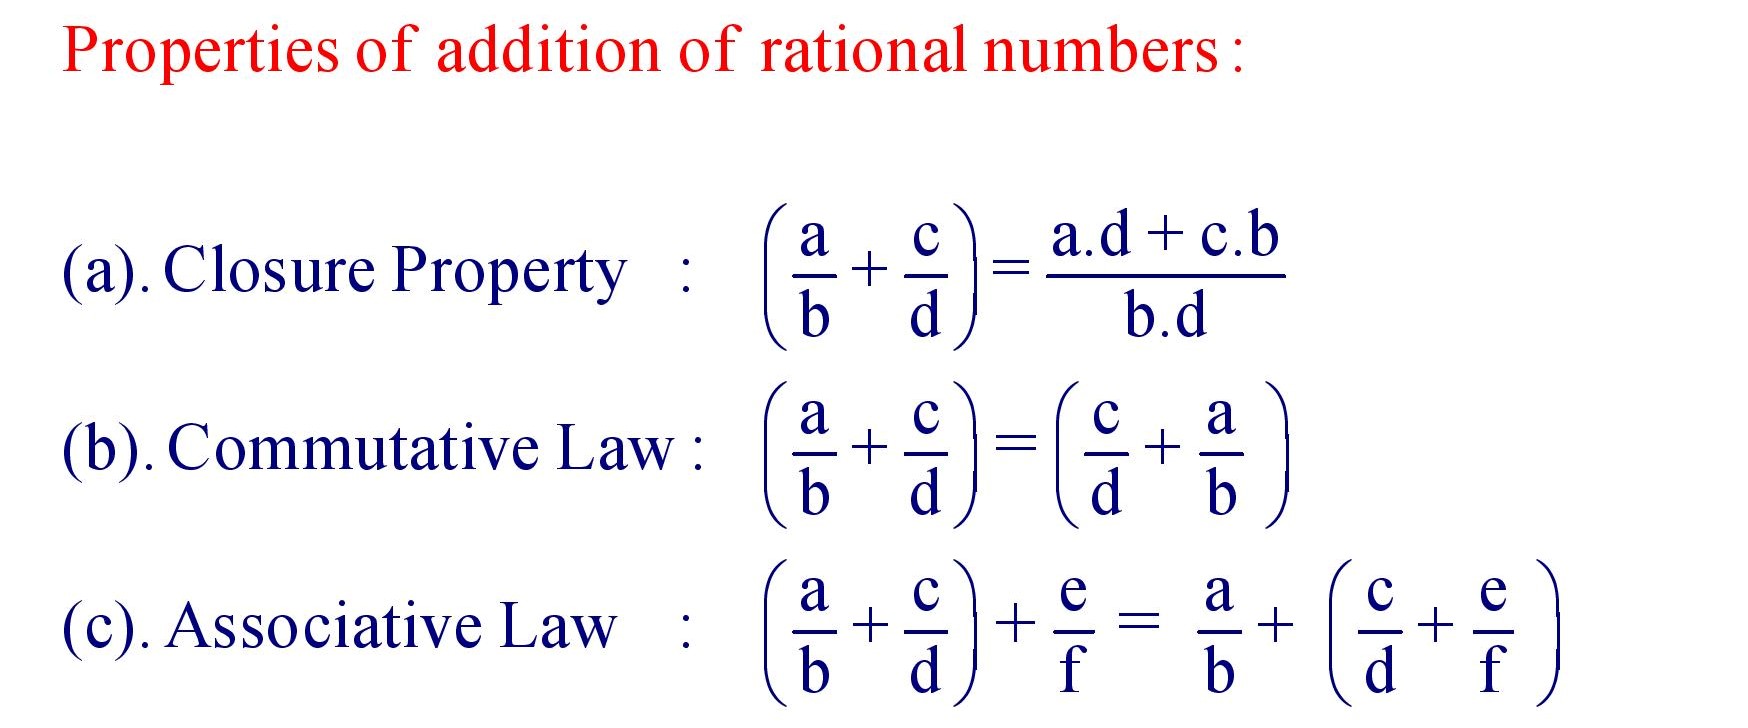 Properties of Addition of Rational Number